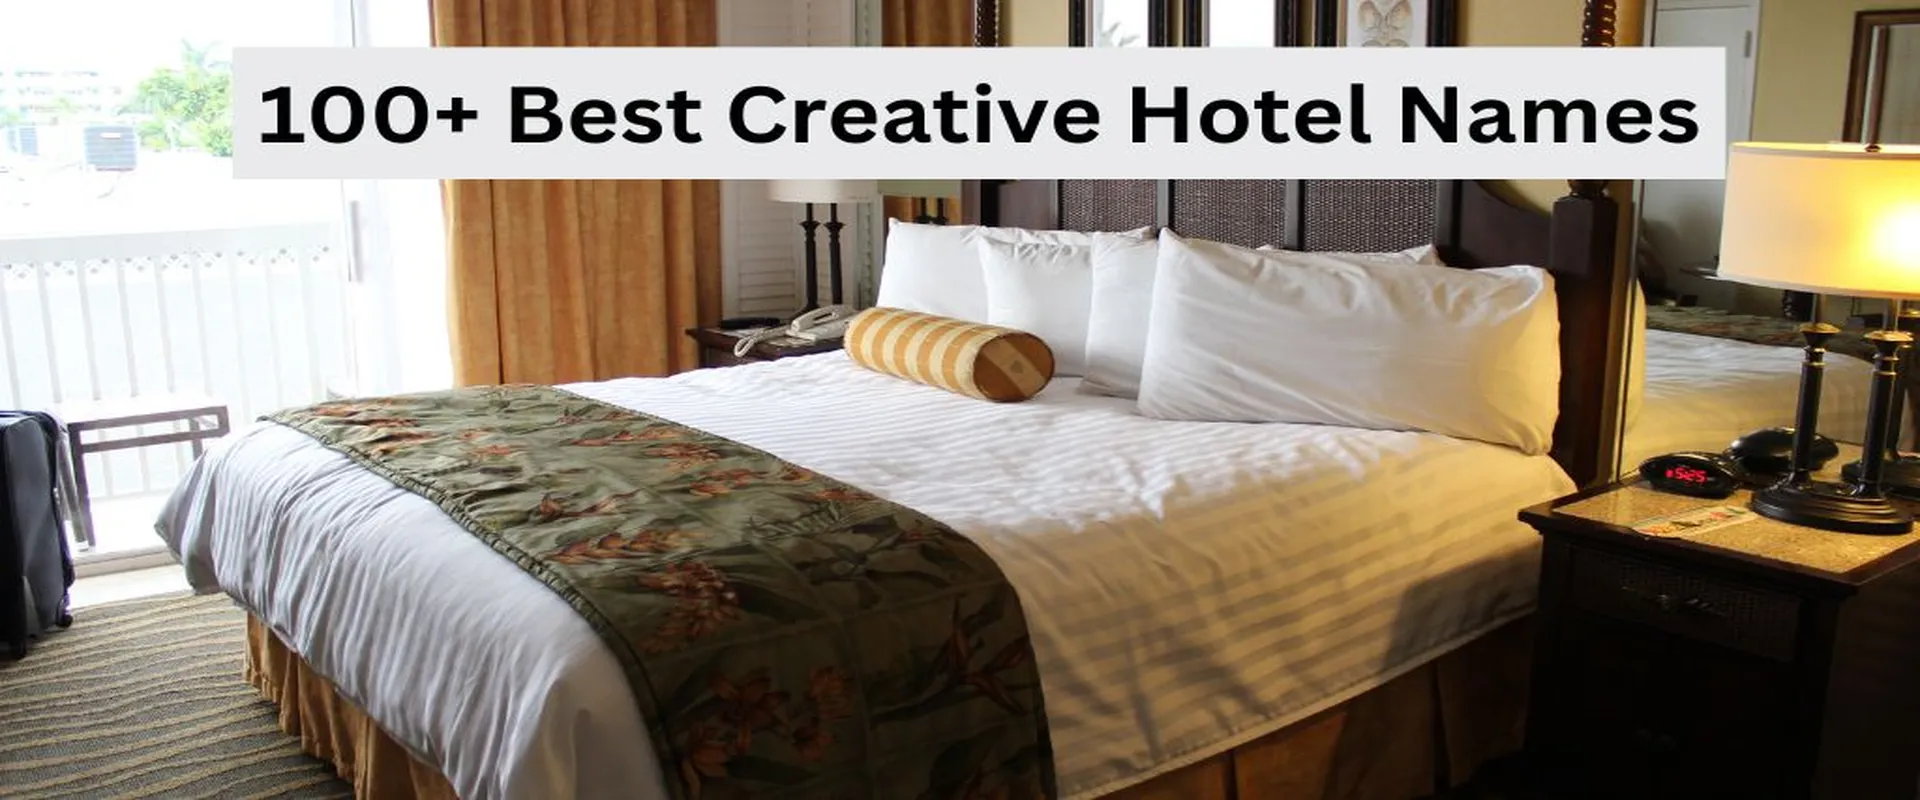 Best Creative Hotel Names To Grow Your Business Fast